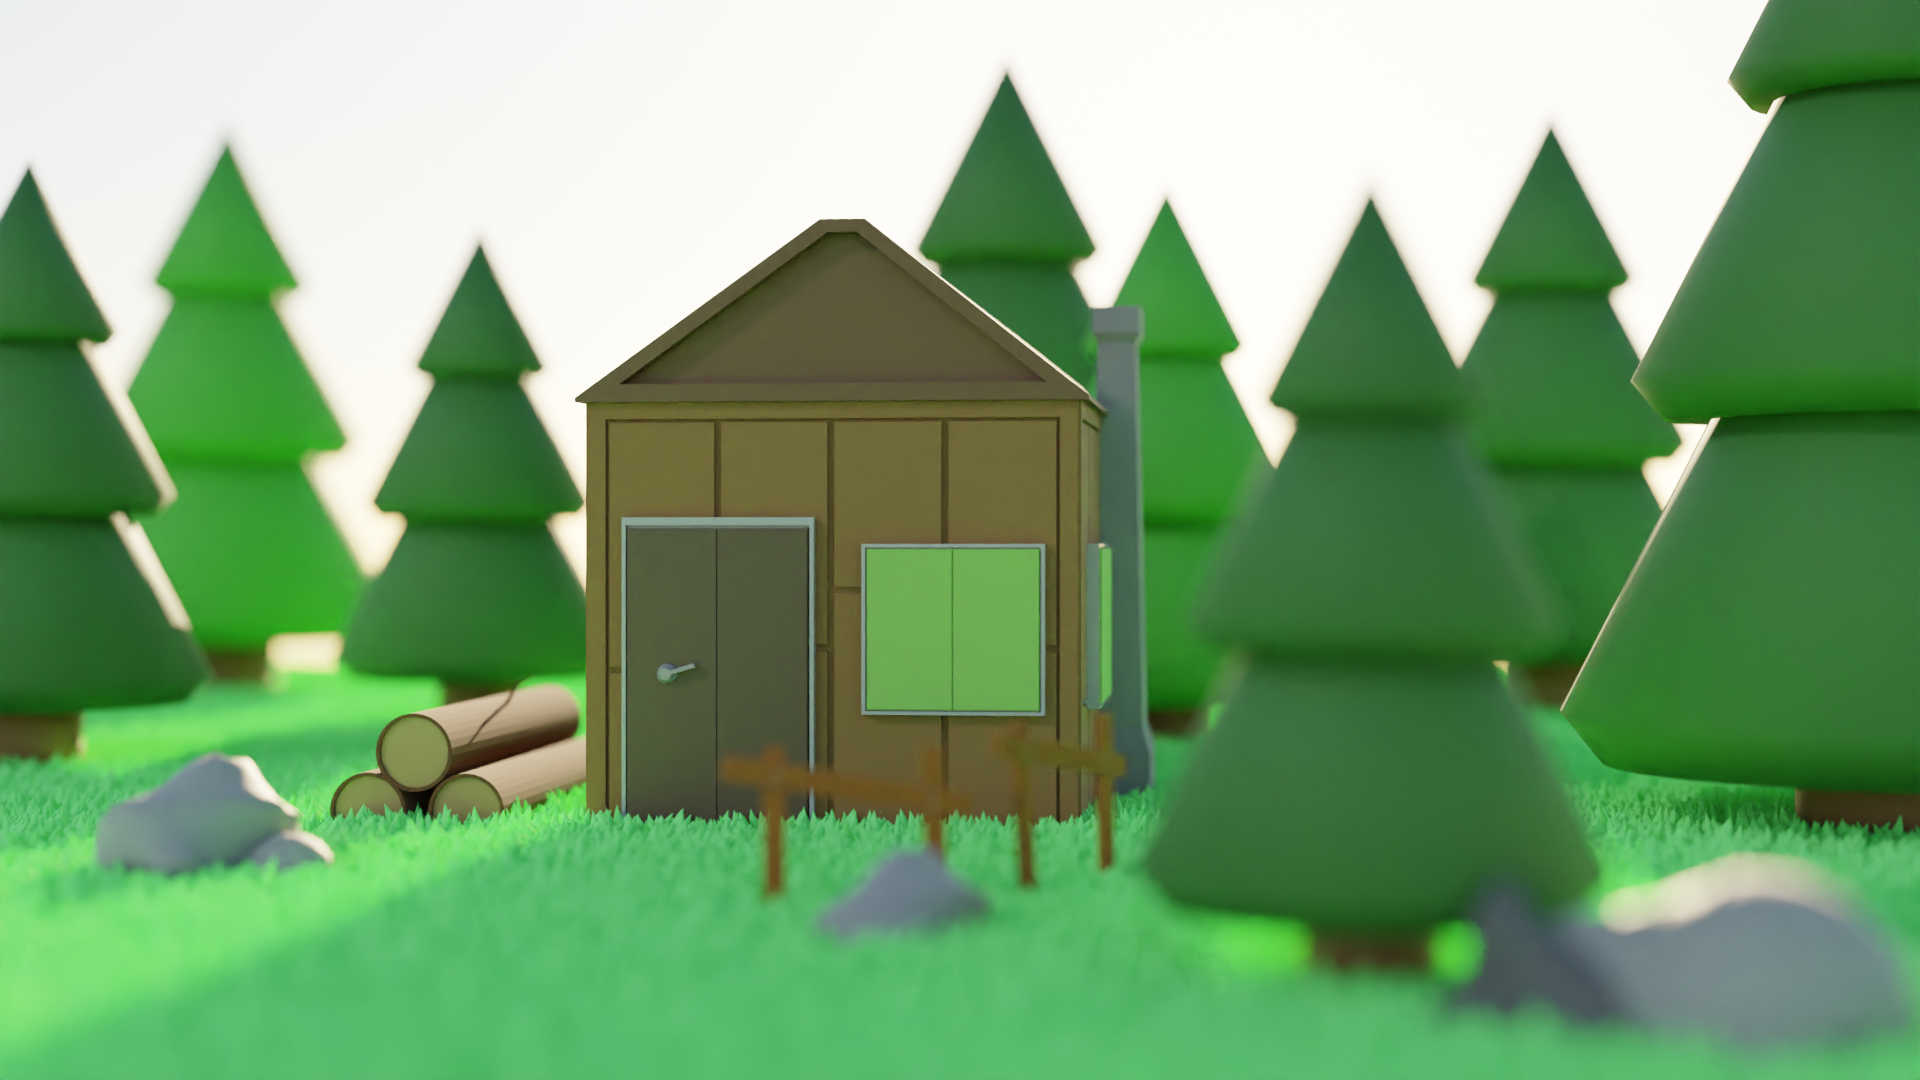 Nft Cabin in the wood